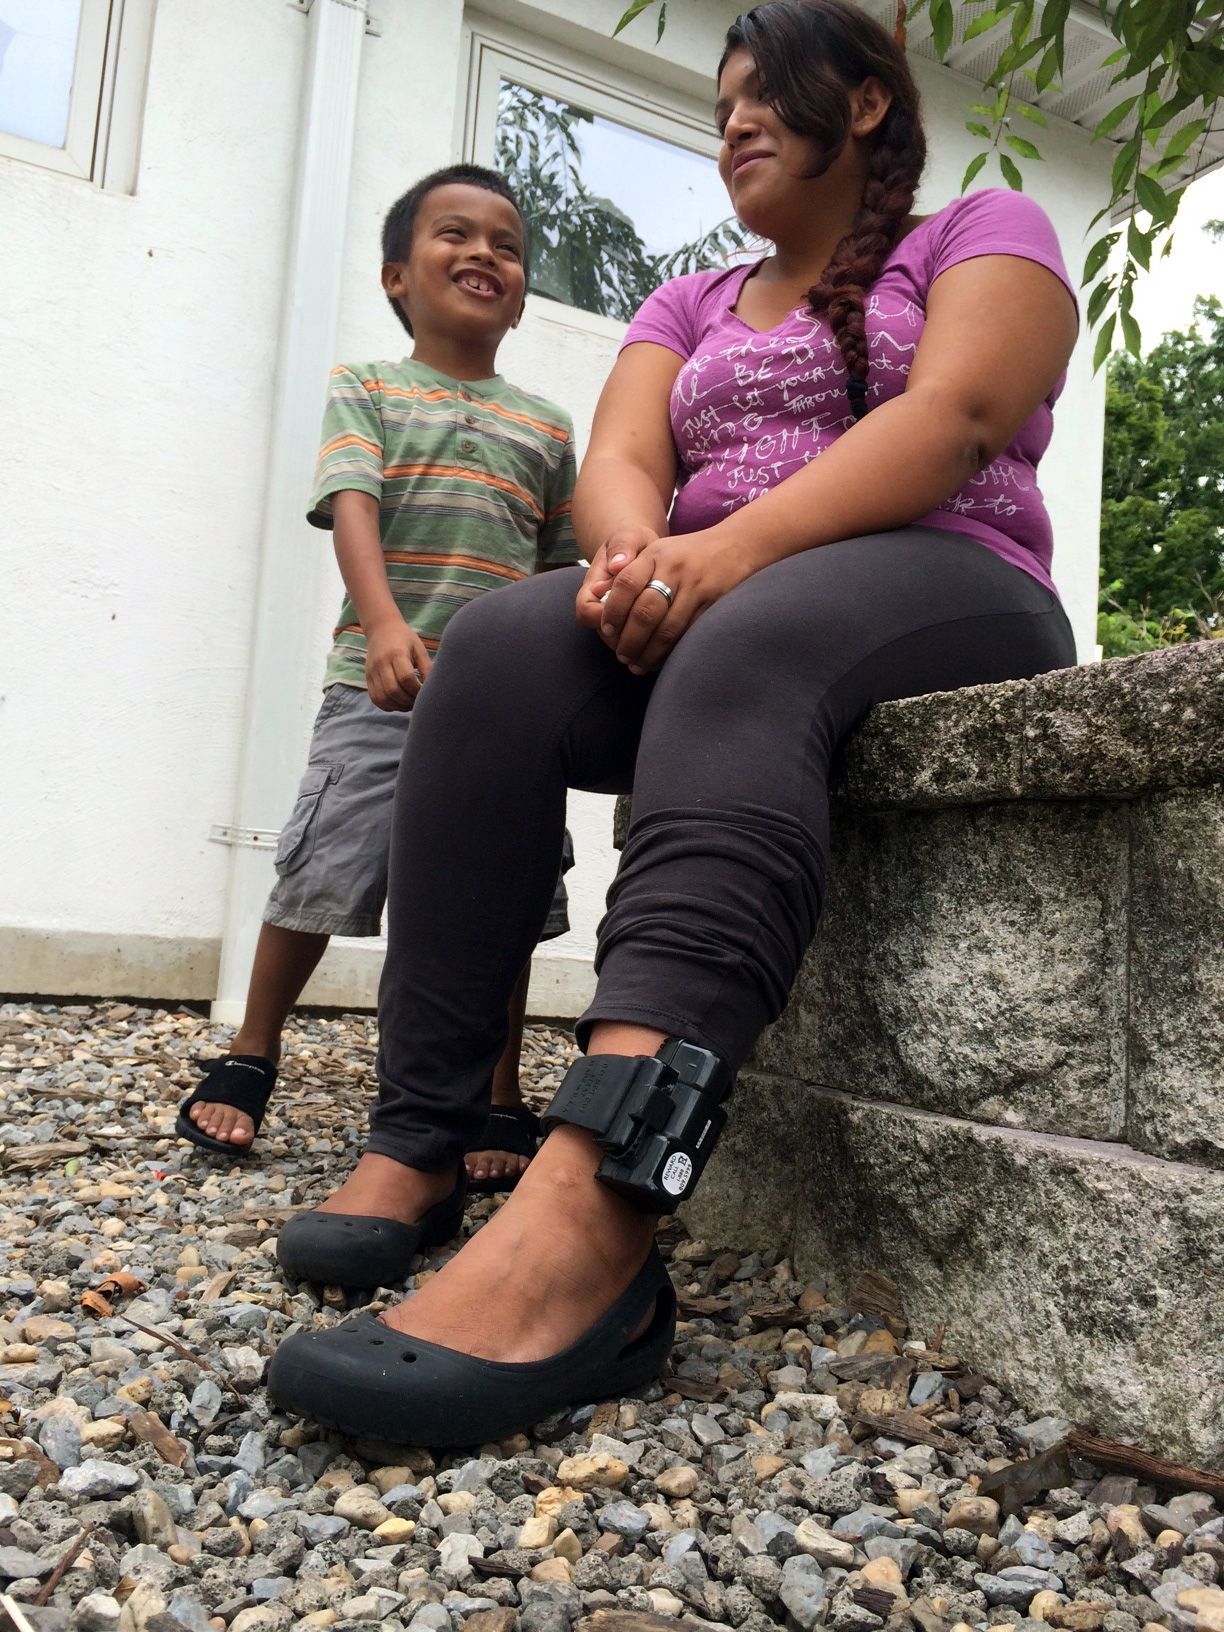 A mother, who is wearing an ankle monitor, sits with her son.